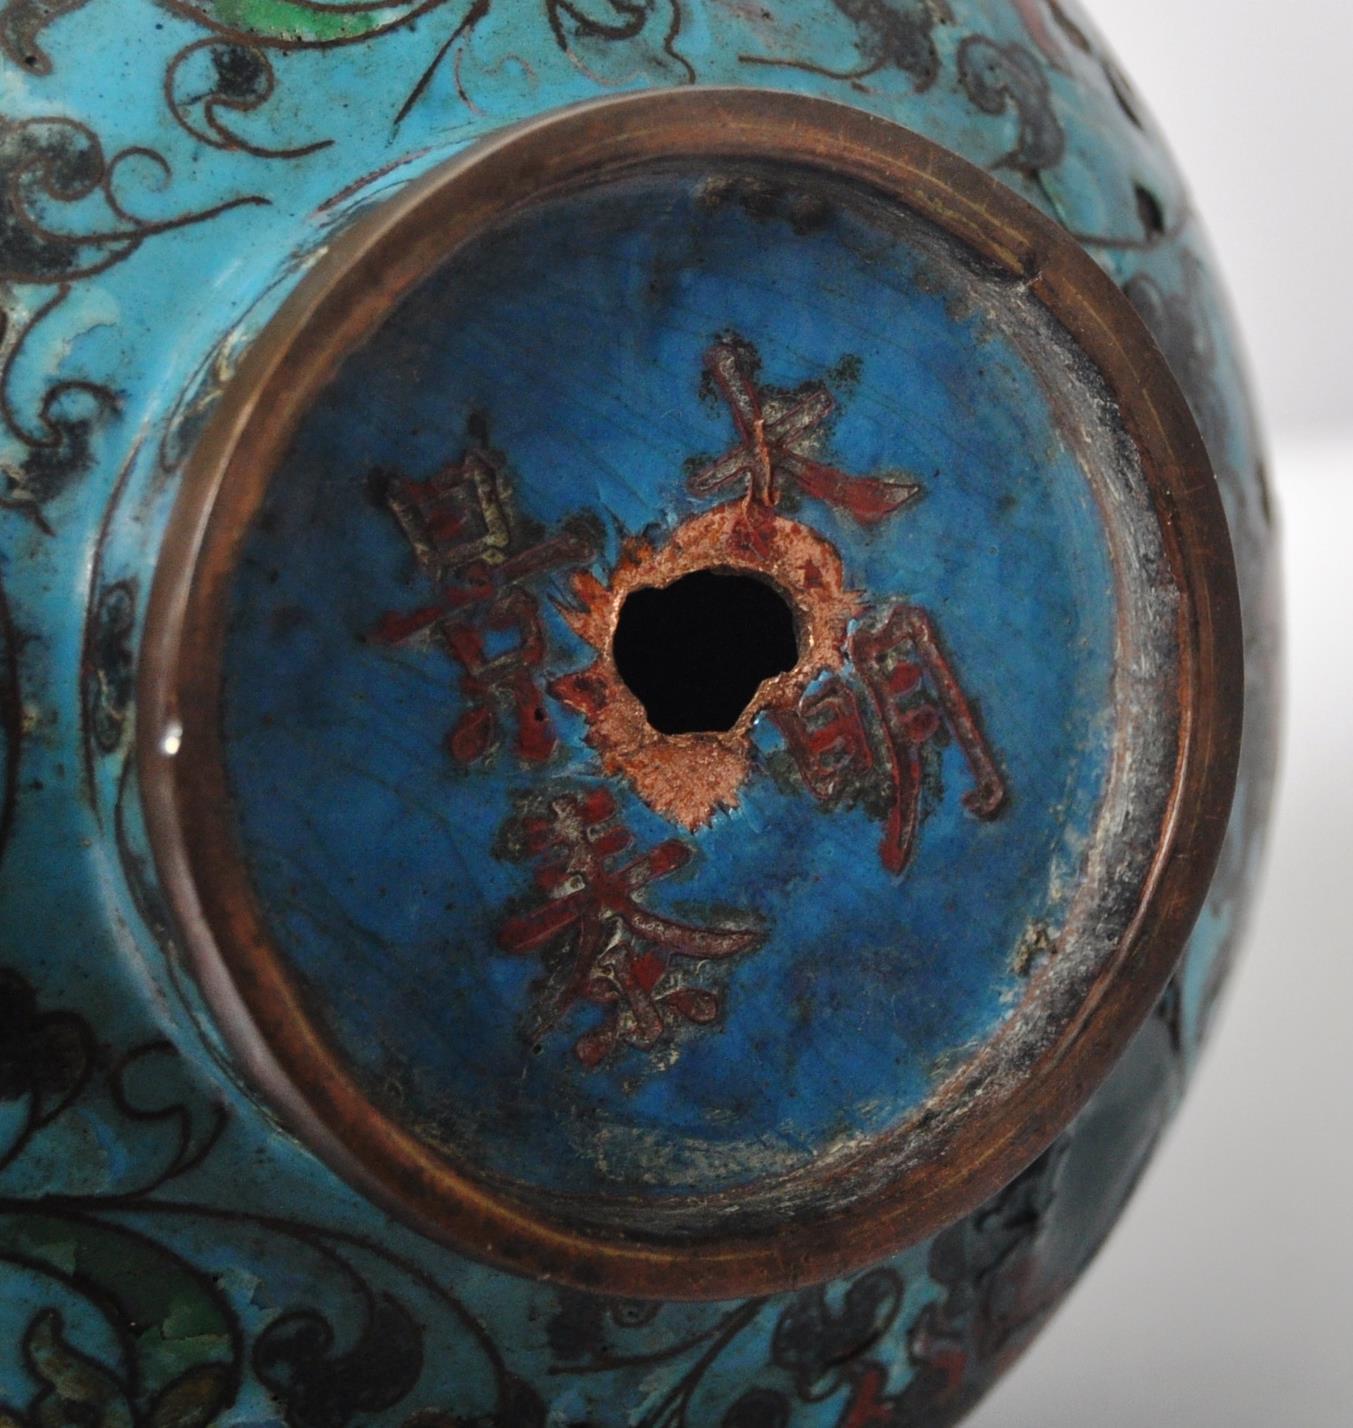 EARLY 20TH CENTURY CHINESE CLOISONNE VASE - Image 7 of 7